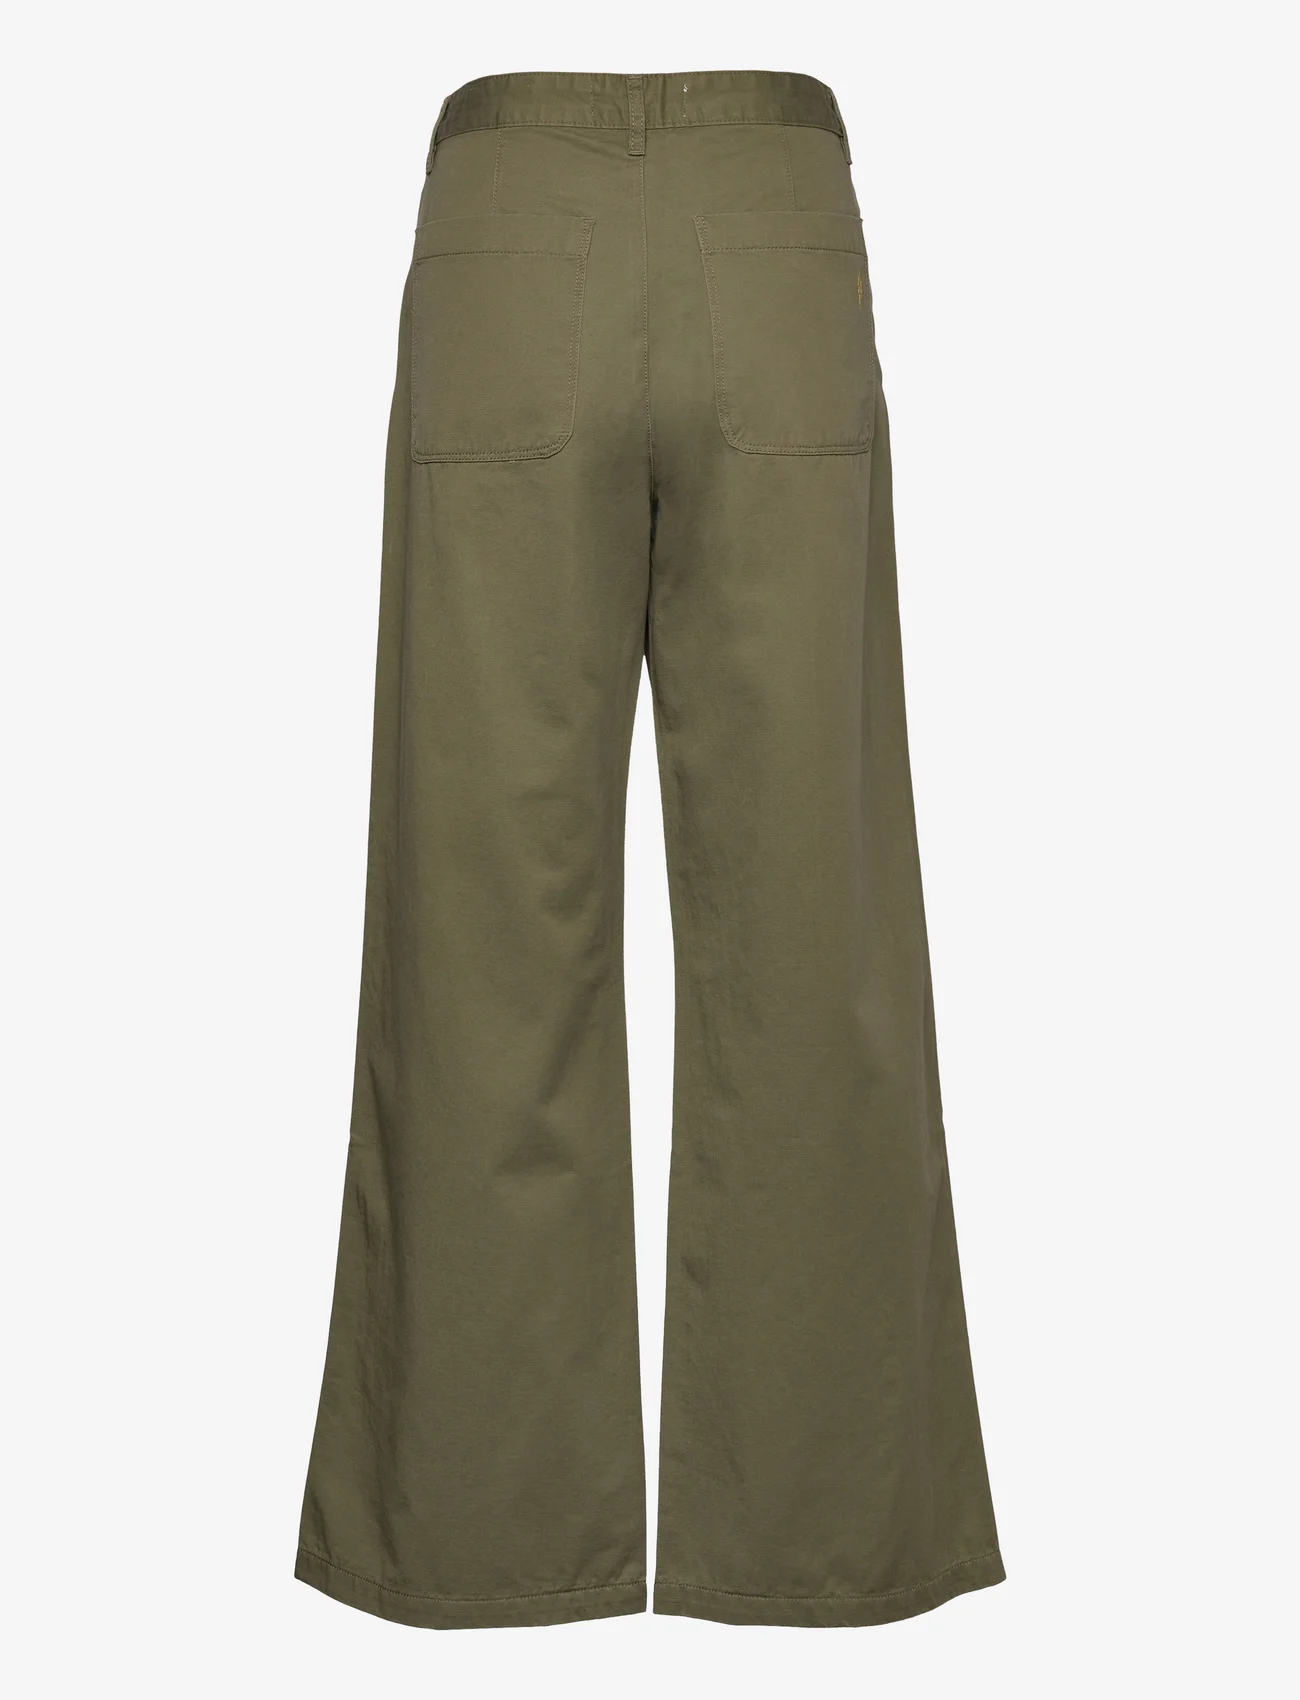 Sofie Schnoor - Trousers - chino's - army green - 1